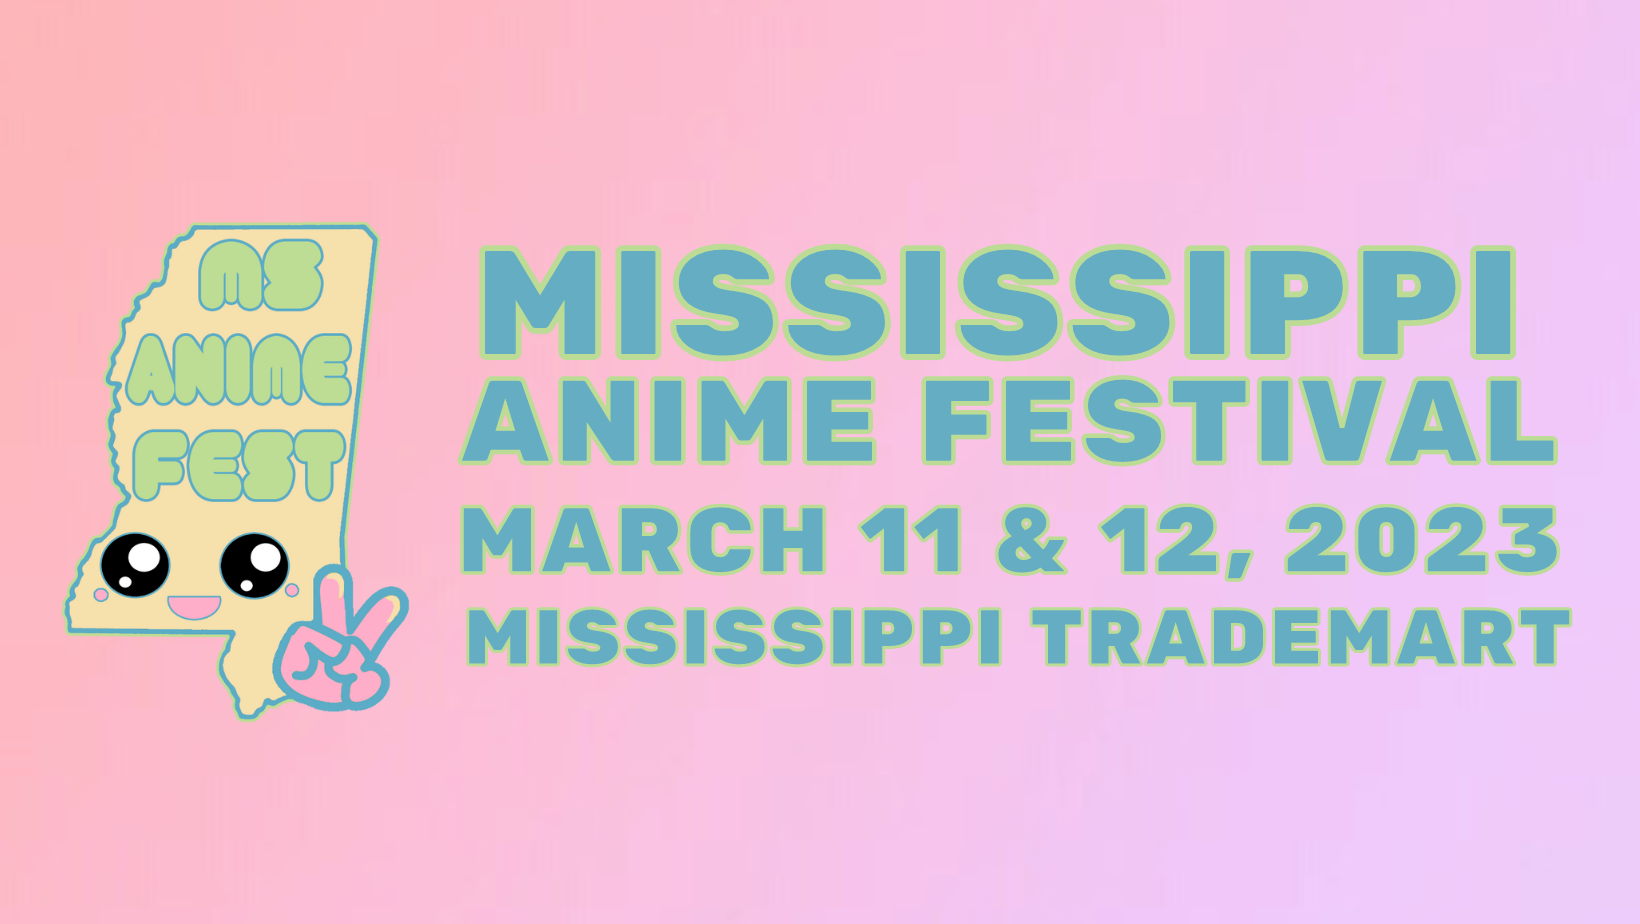 Mississippi Anime Fest 2023 Tickets at Mississippi Trade Mart in Jackson by VXV Events Tixr